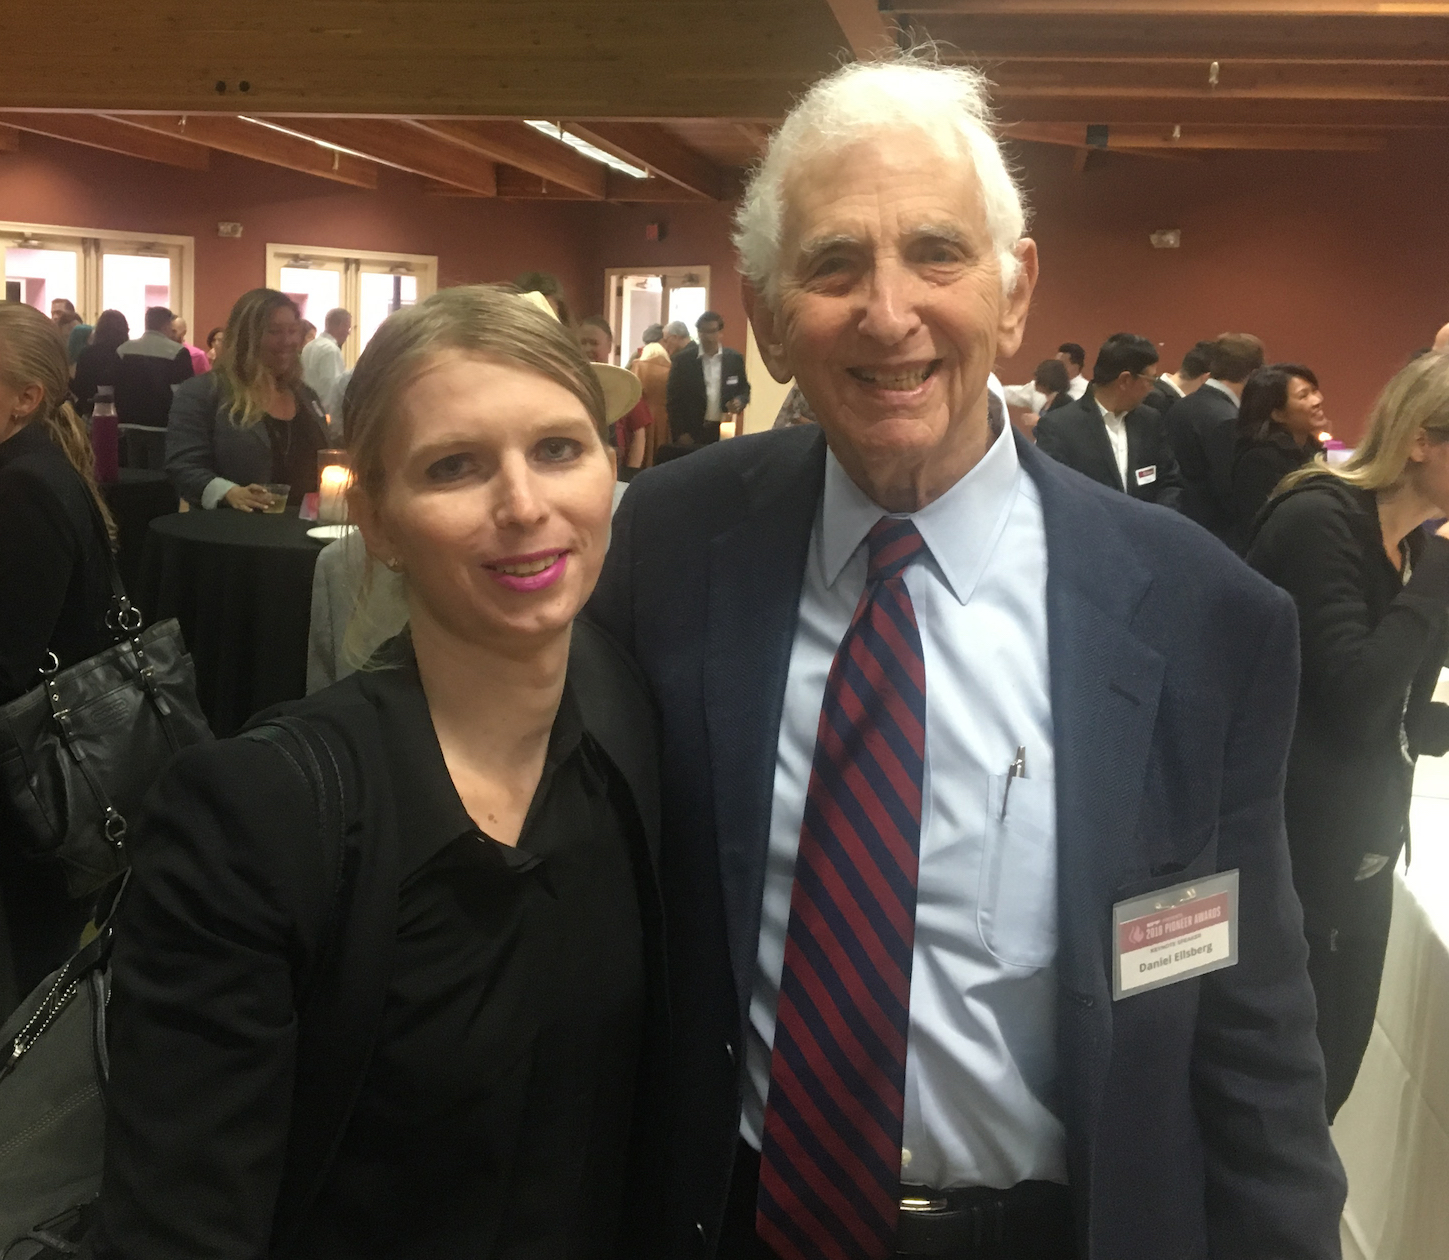 A Picture of Chelsea Manning and Daniel Ellsberg